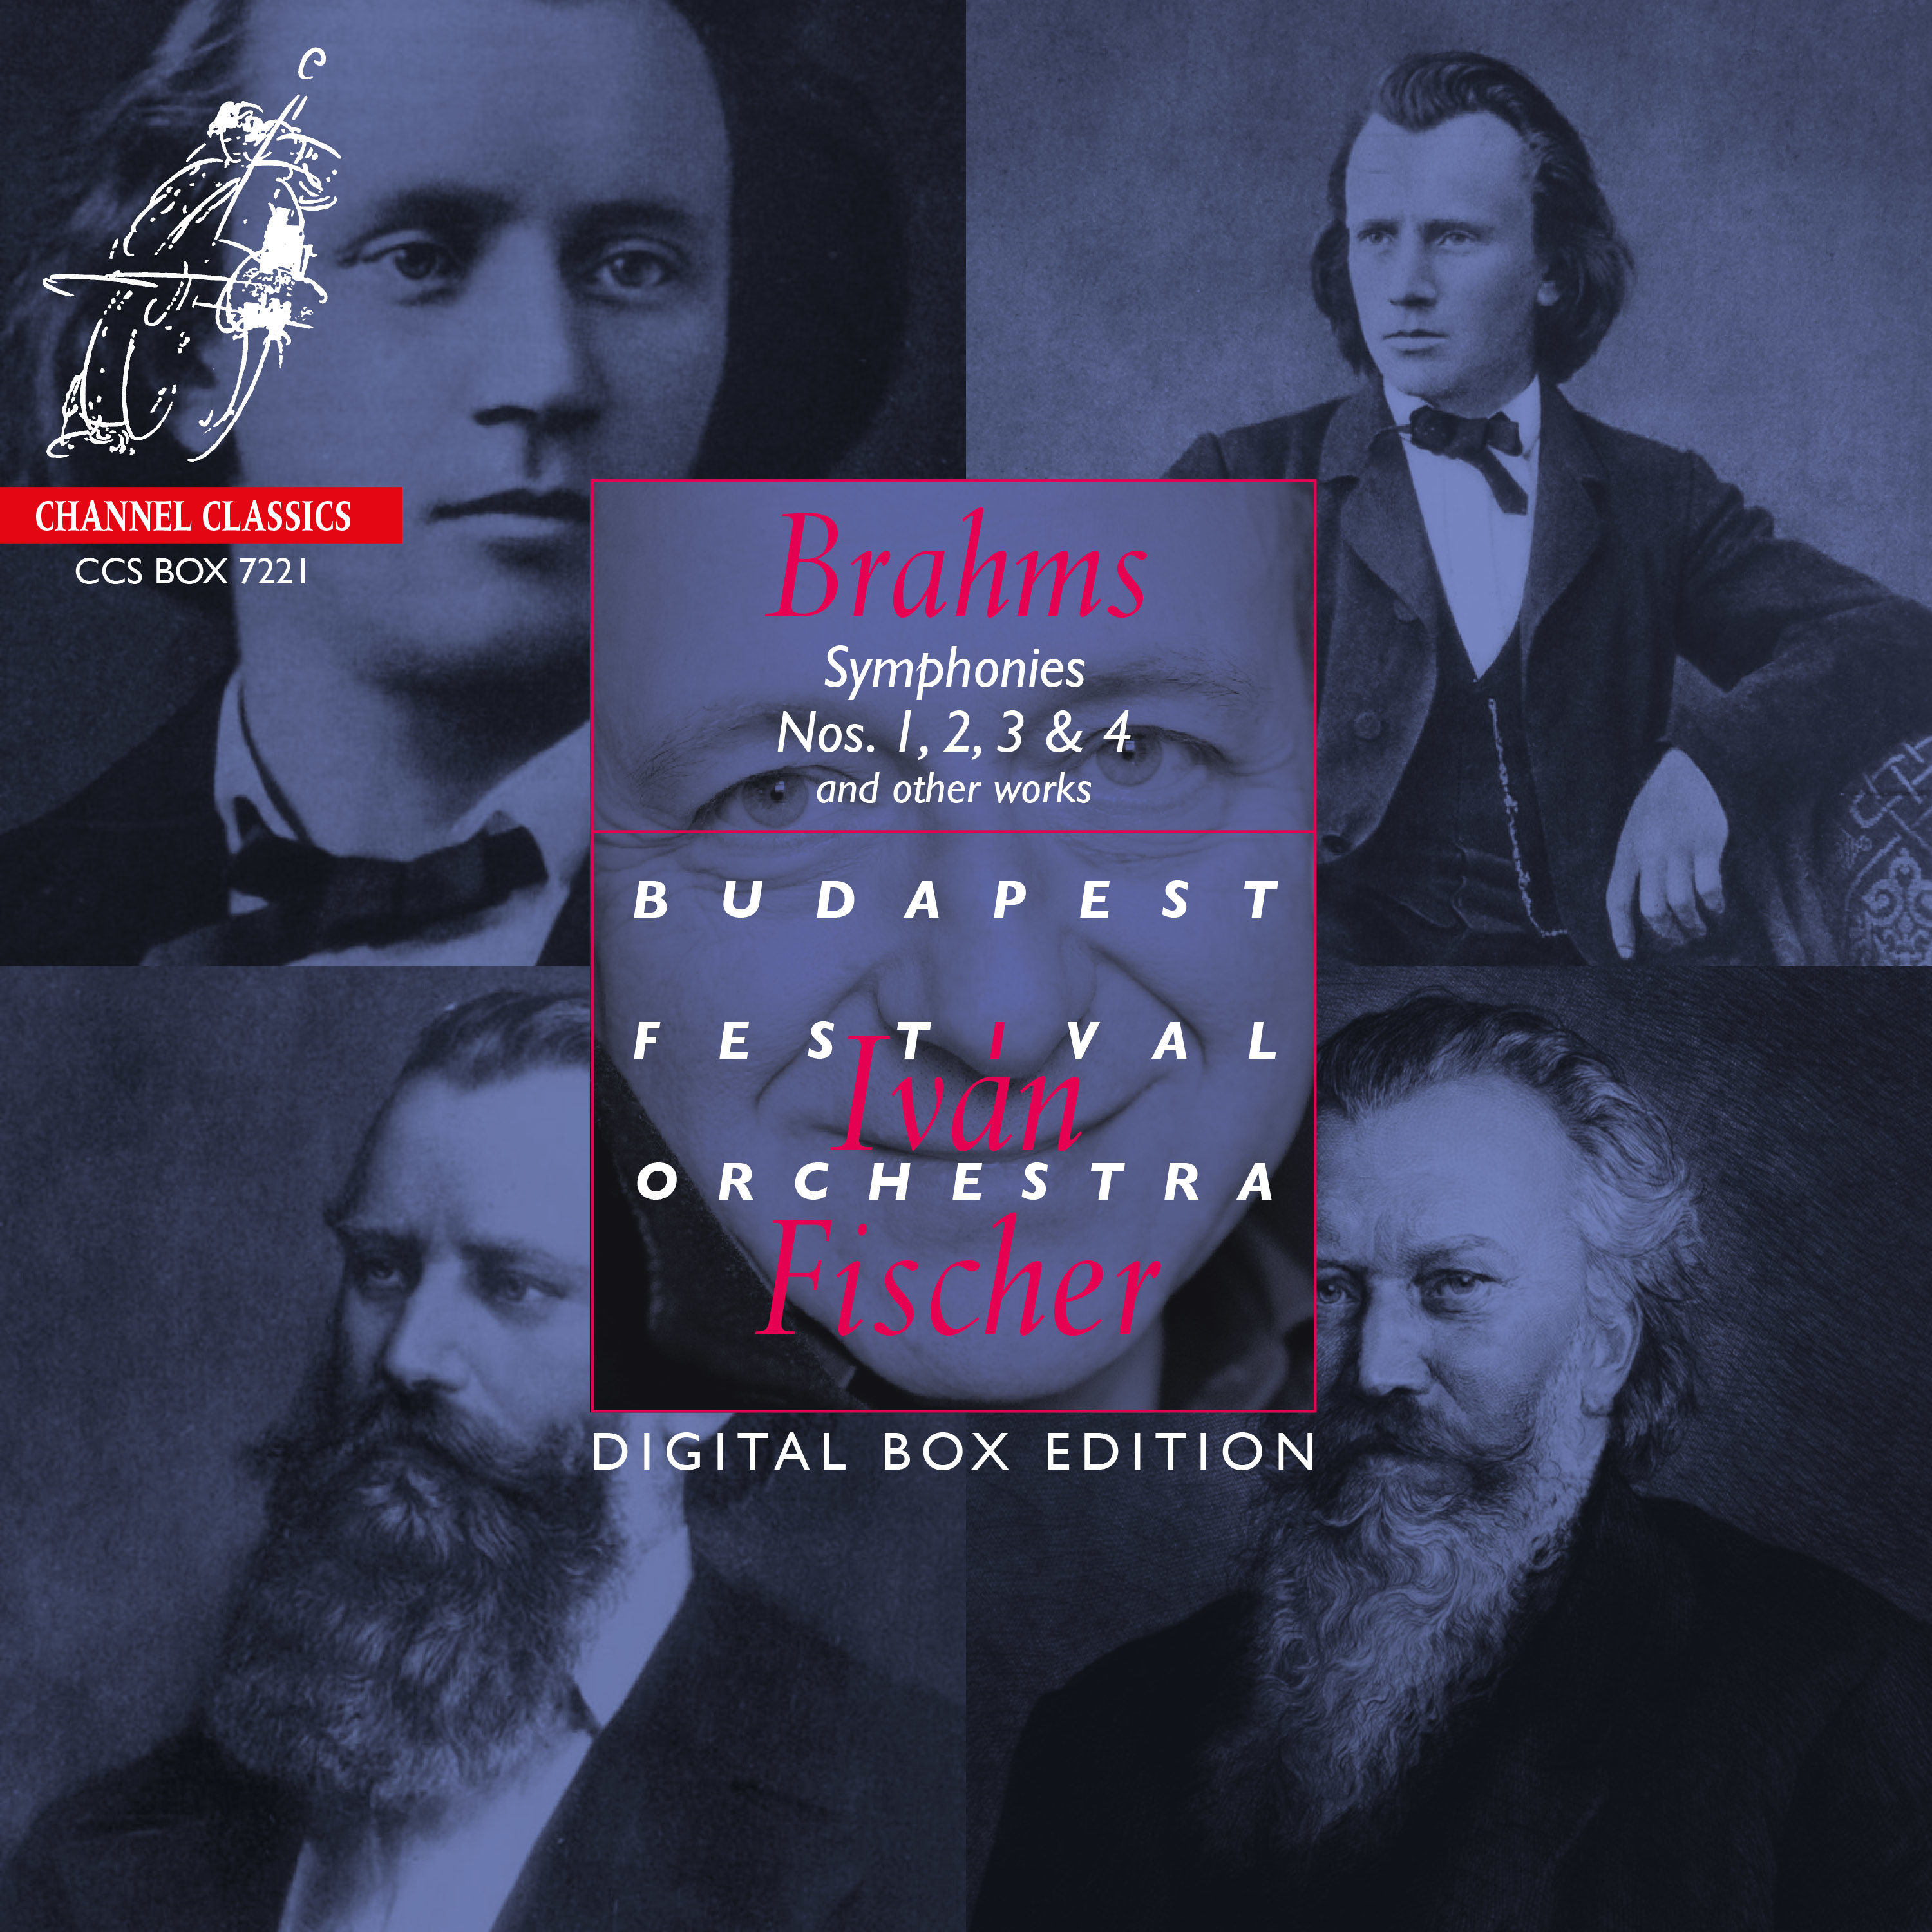 Ivan Fischer & Budapest Festival Orchestra – Brahms: Symphonies Nos. 1, 2, 3 & 4 and Other Works (2021) [FLAC 24bit/192kHz]